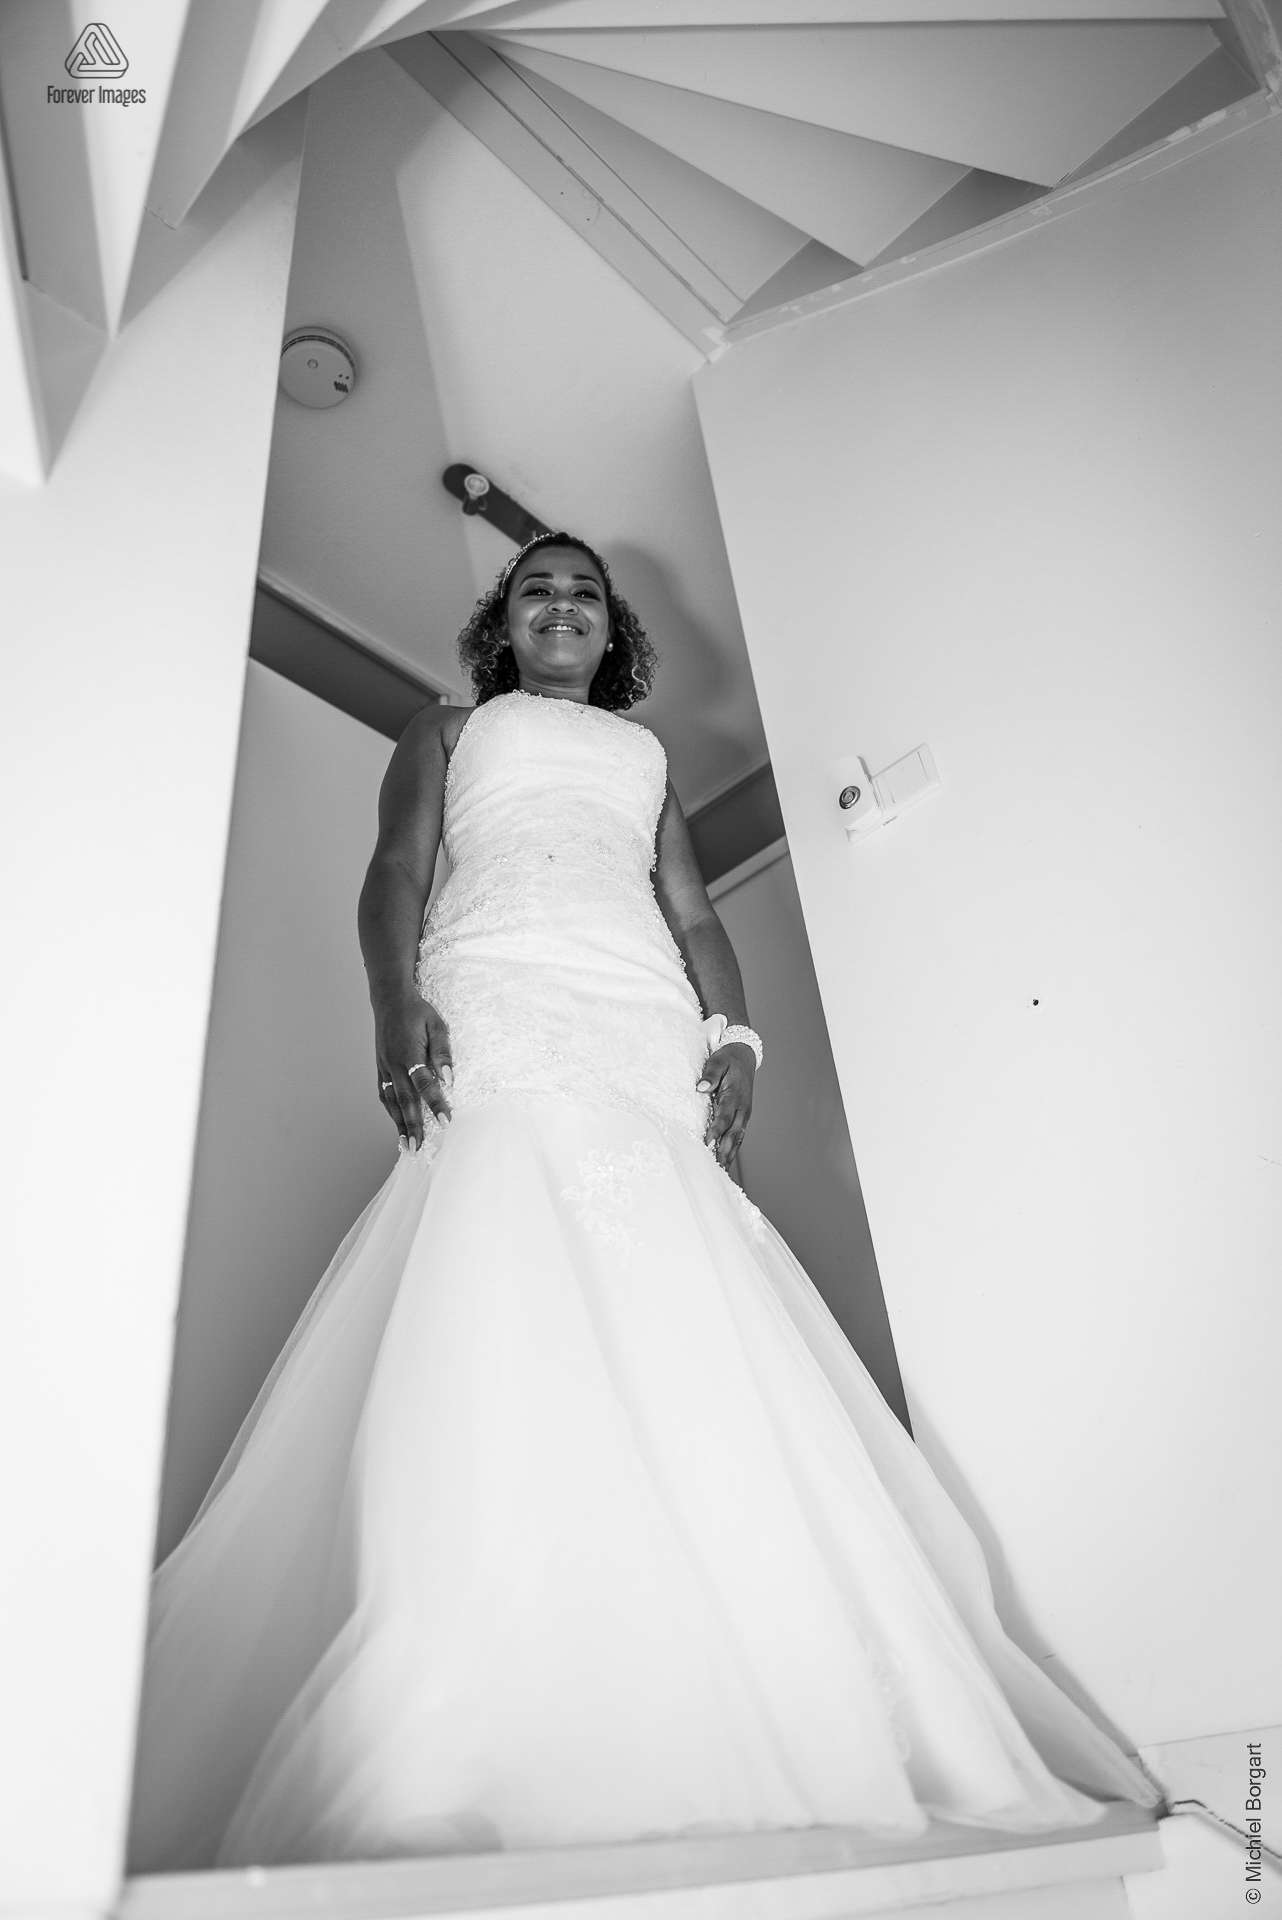 Bridal photo black and white on top of the world | Kamiel Elseric | Wedding Photographer Michiel Borgart - Forever Images.